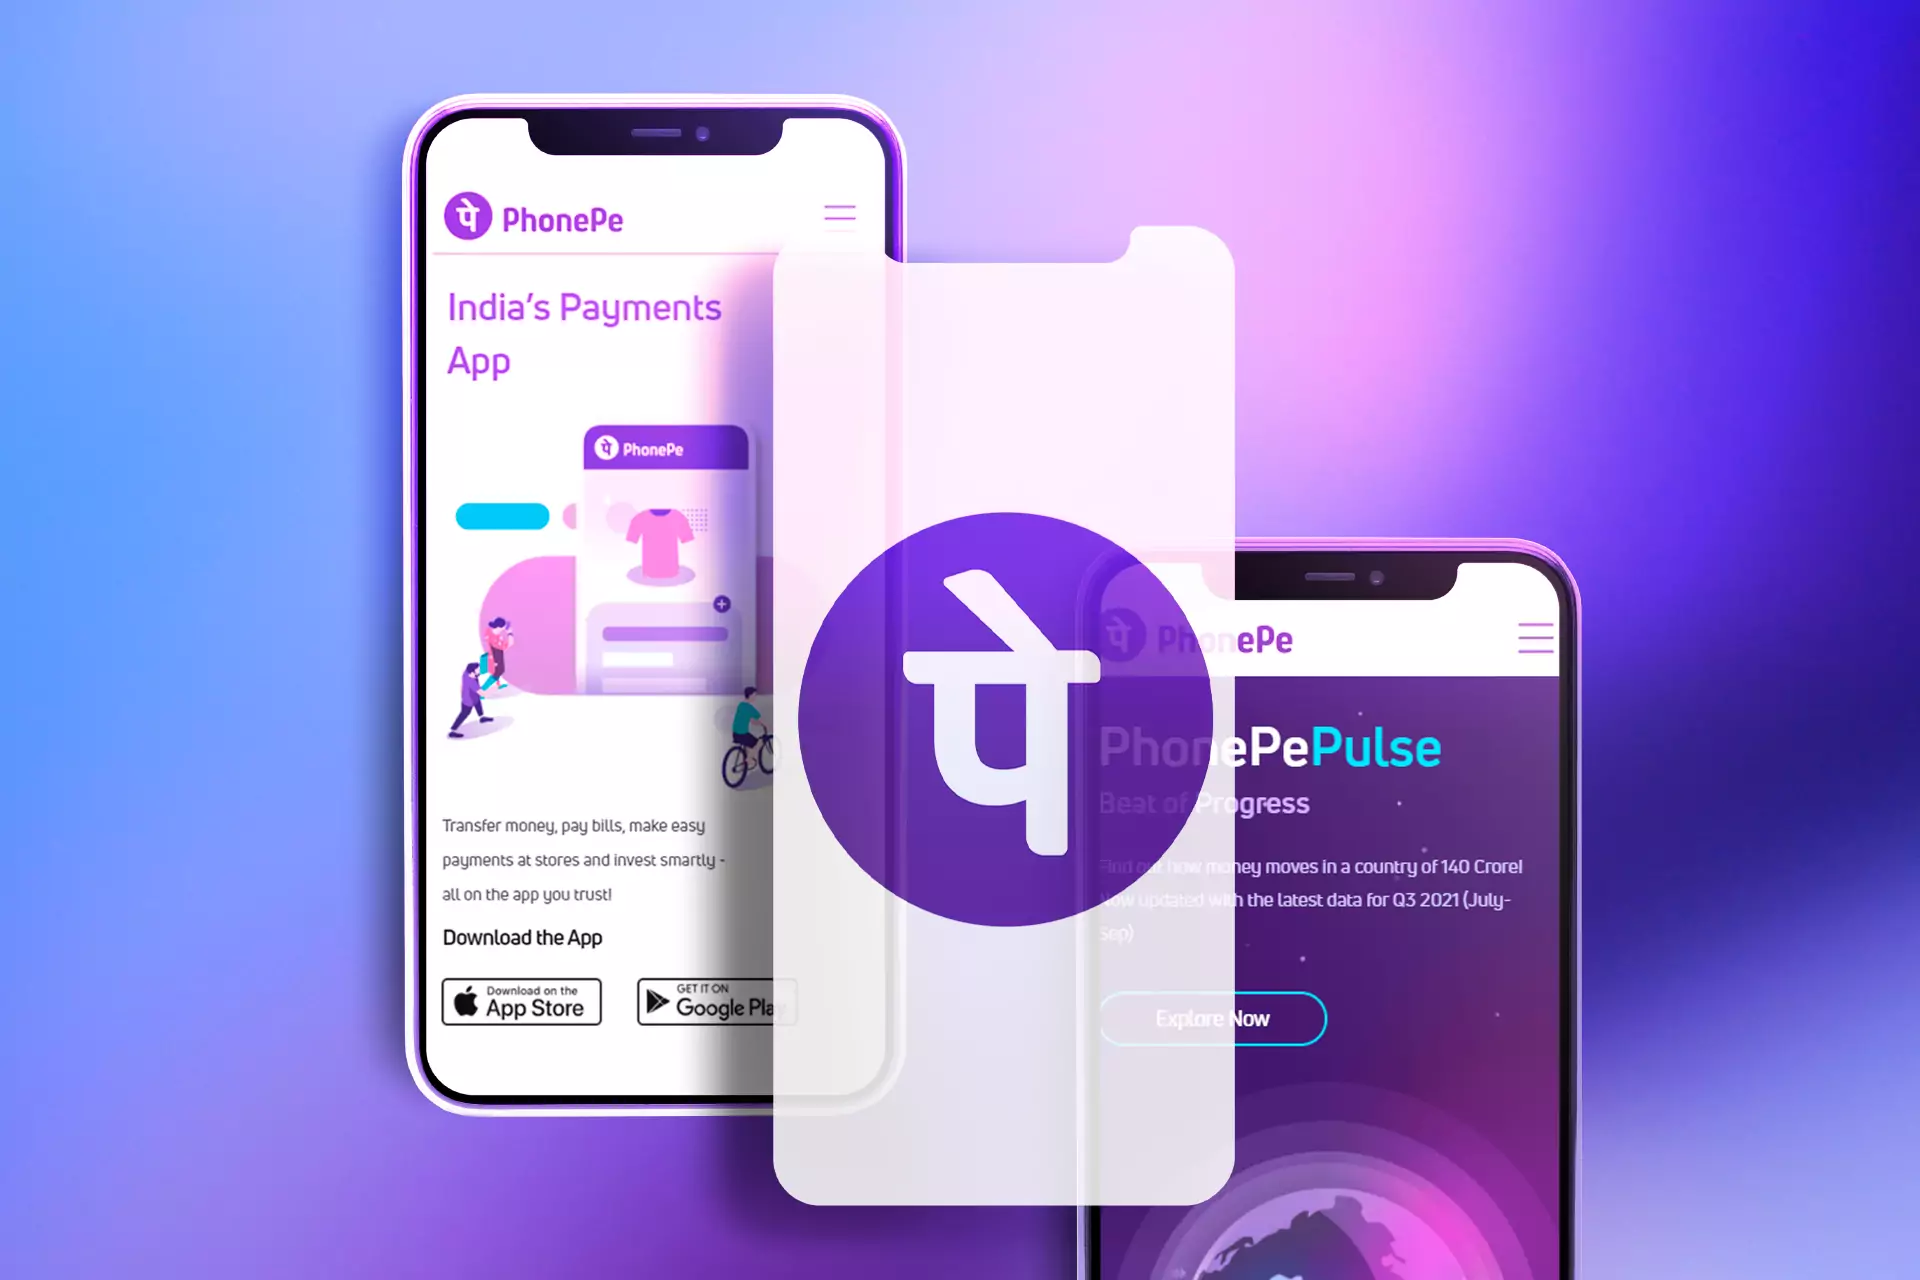 PhonePe is a digital e-wallet that helps to make quick purchases at online casinos.